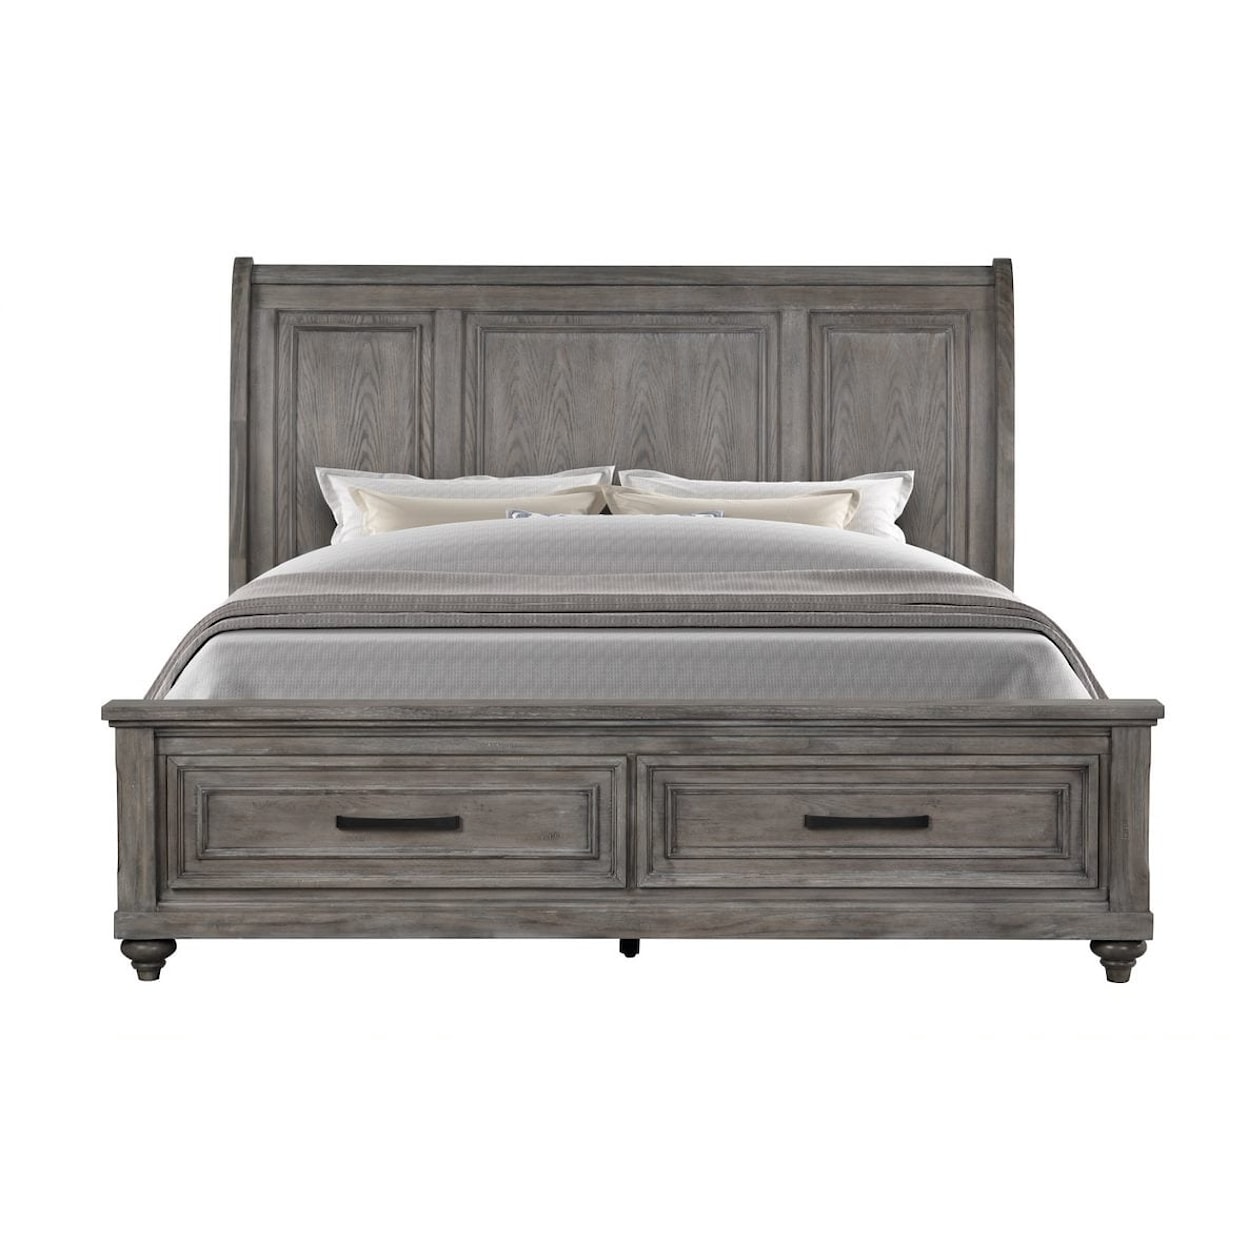 Legends Furniture Linsey Collection Rustic King Bed